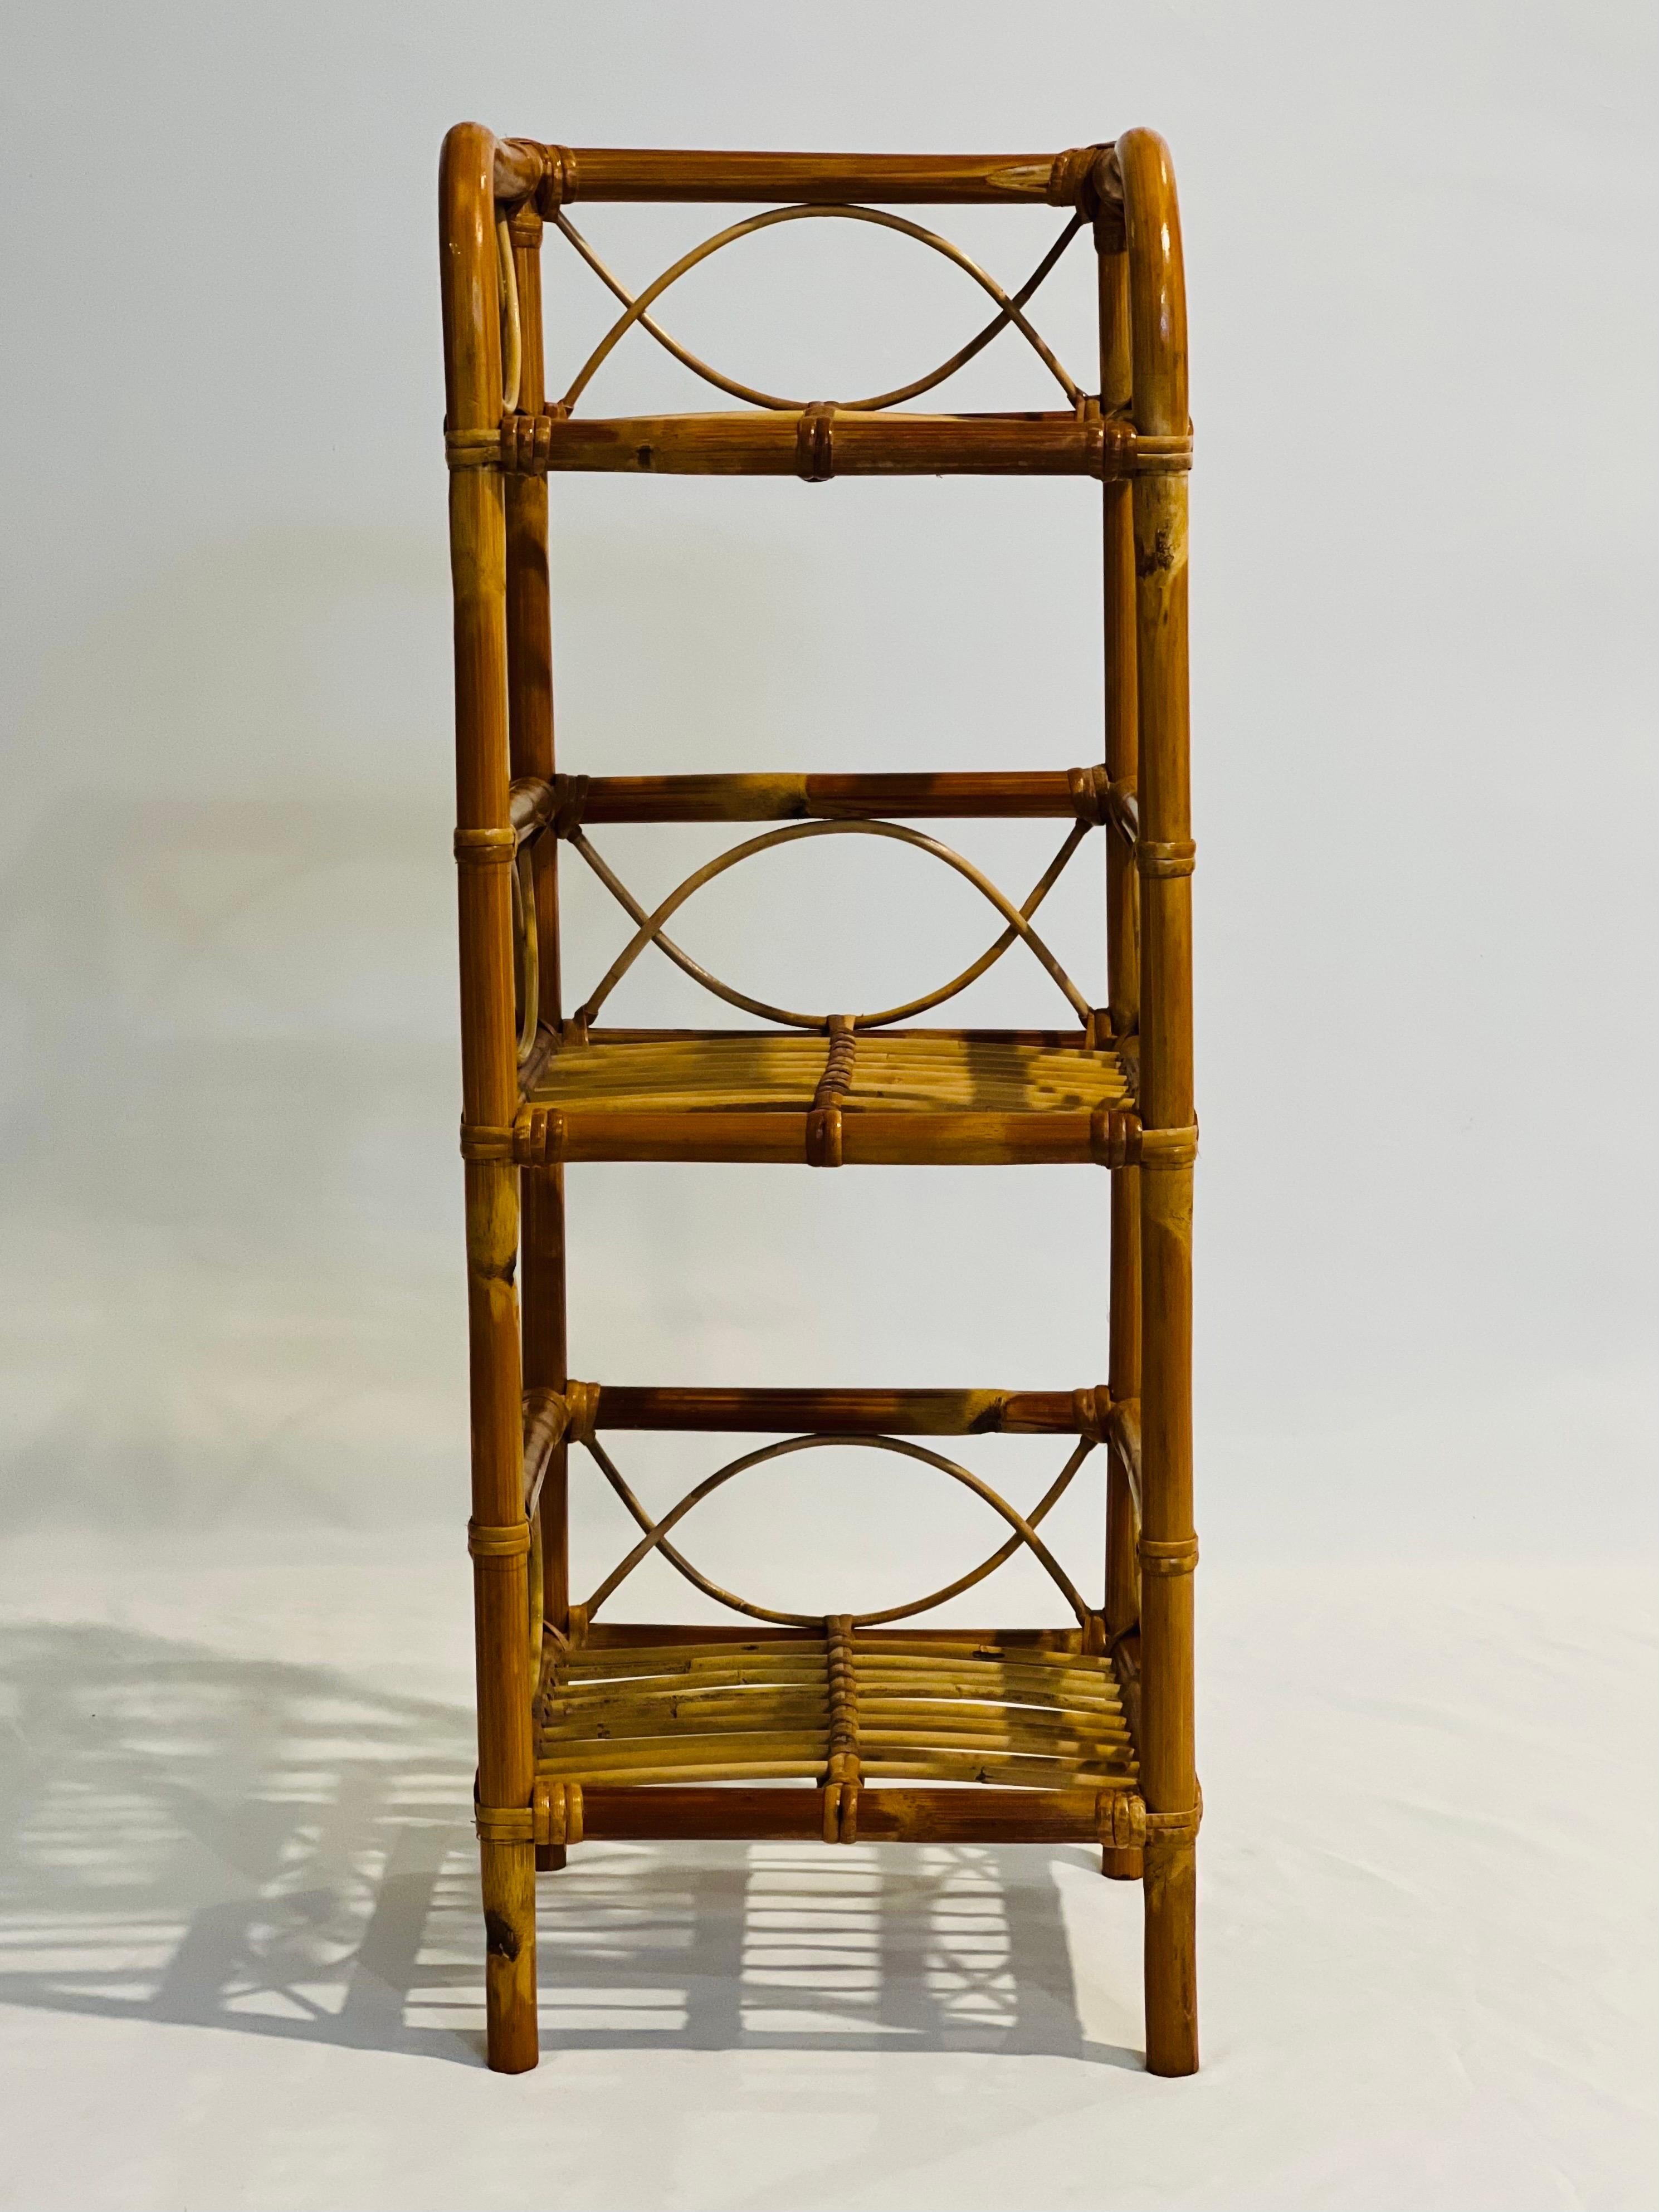 Vintage bamboo and rattan petite étagère.

Charming three tier open shelving perfect for plants, books or displaying small items. Lovely details, sturdy and in very good condition.